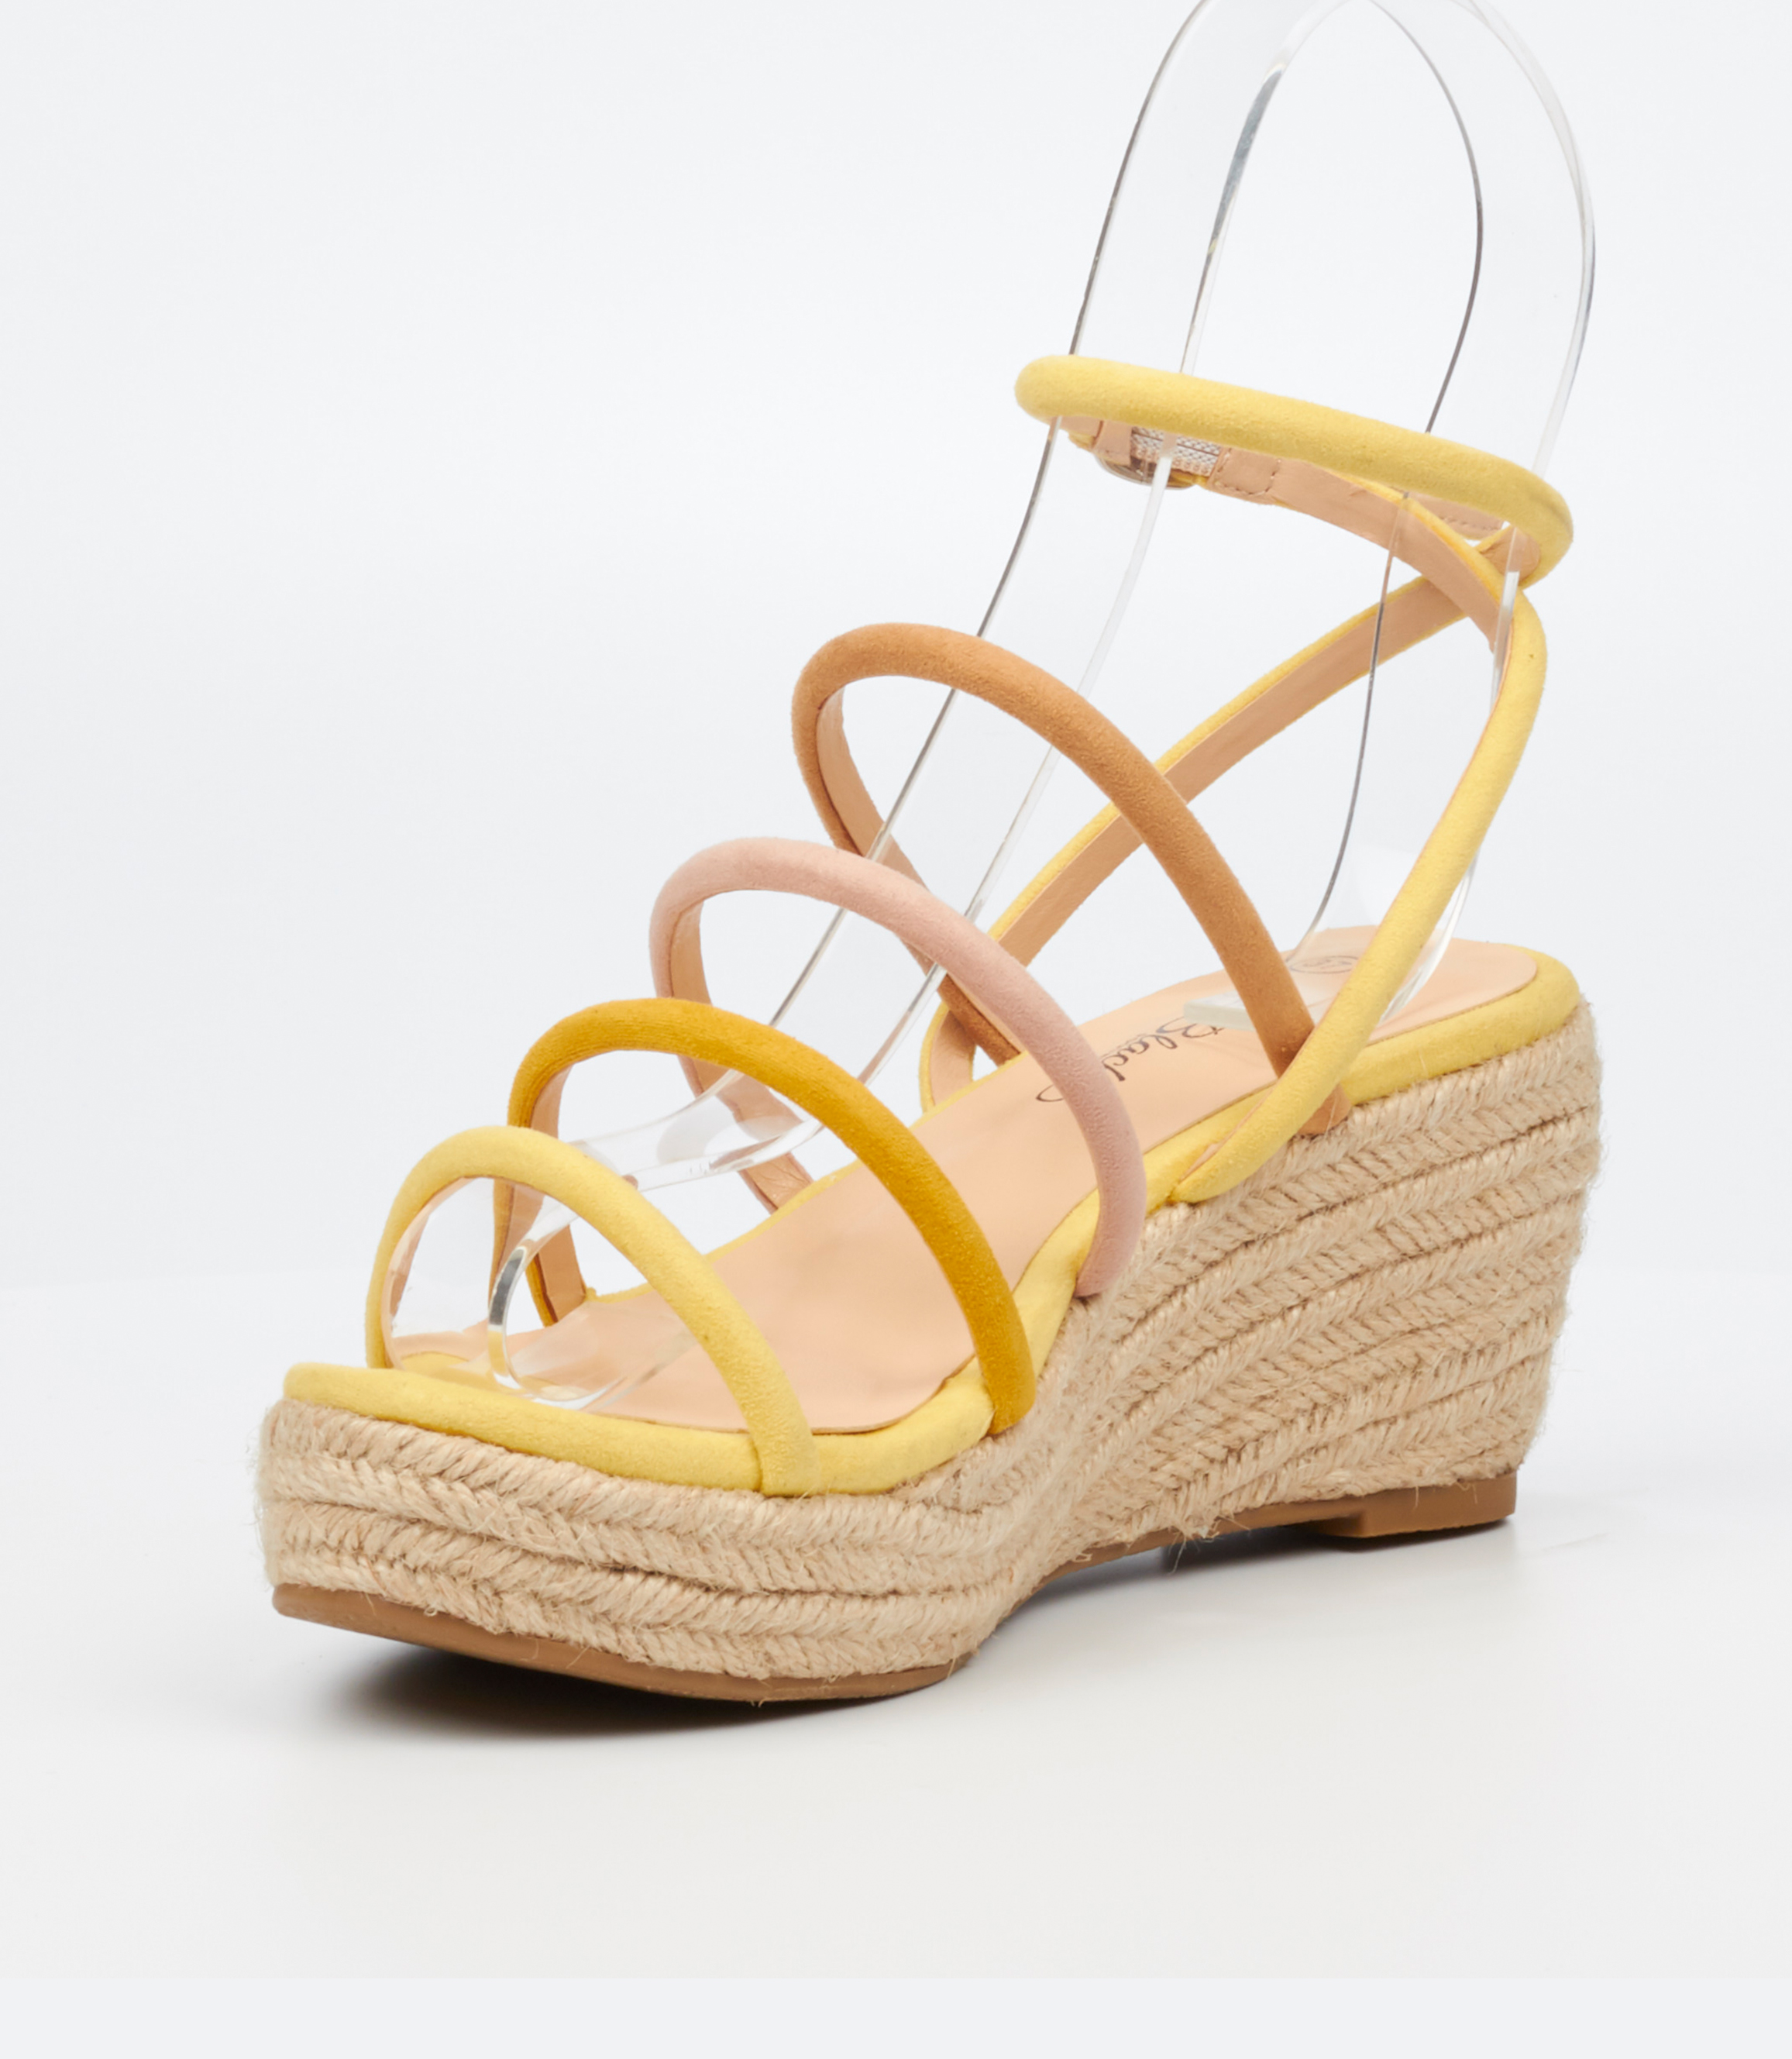 MISS BLACK YELLOW NAPLES1 SANDAL | Rosella - Style inspired by elegance